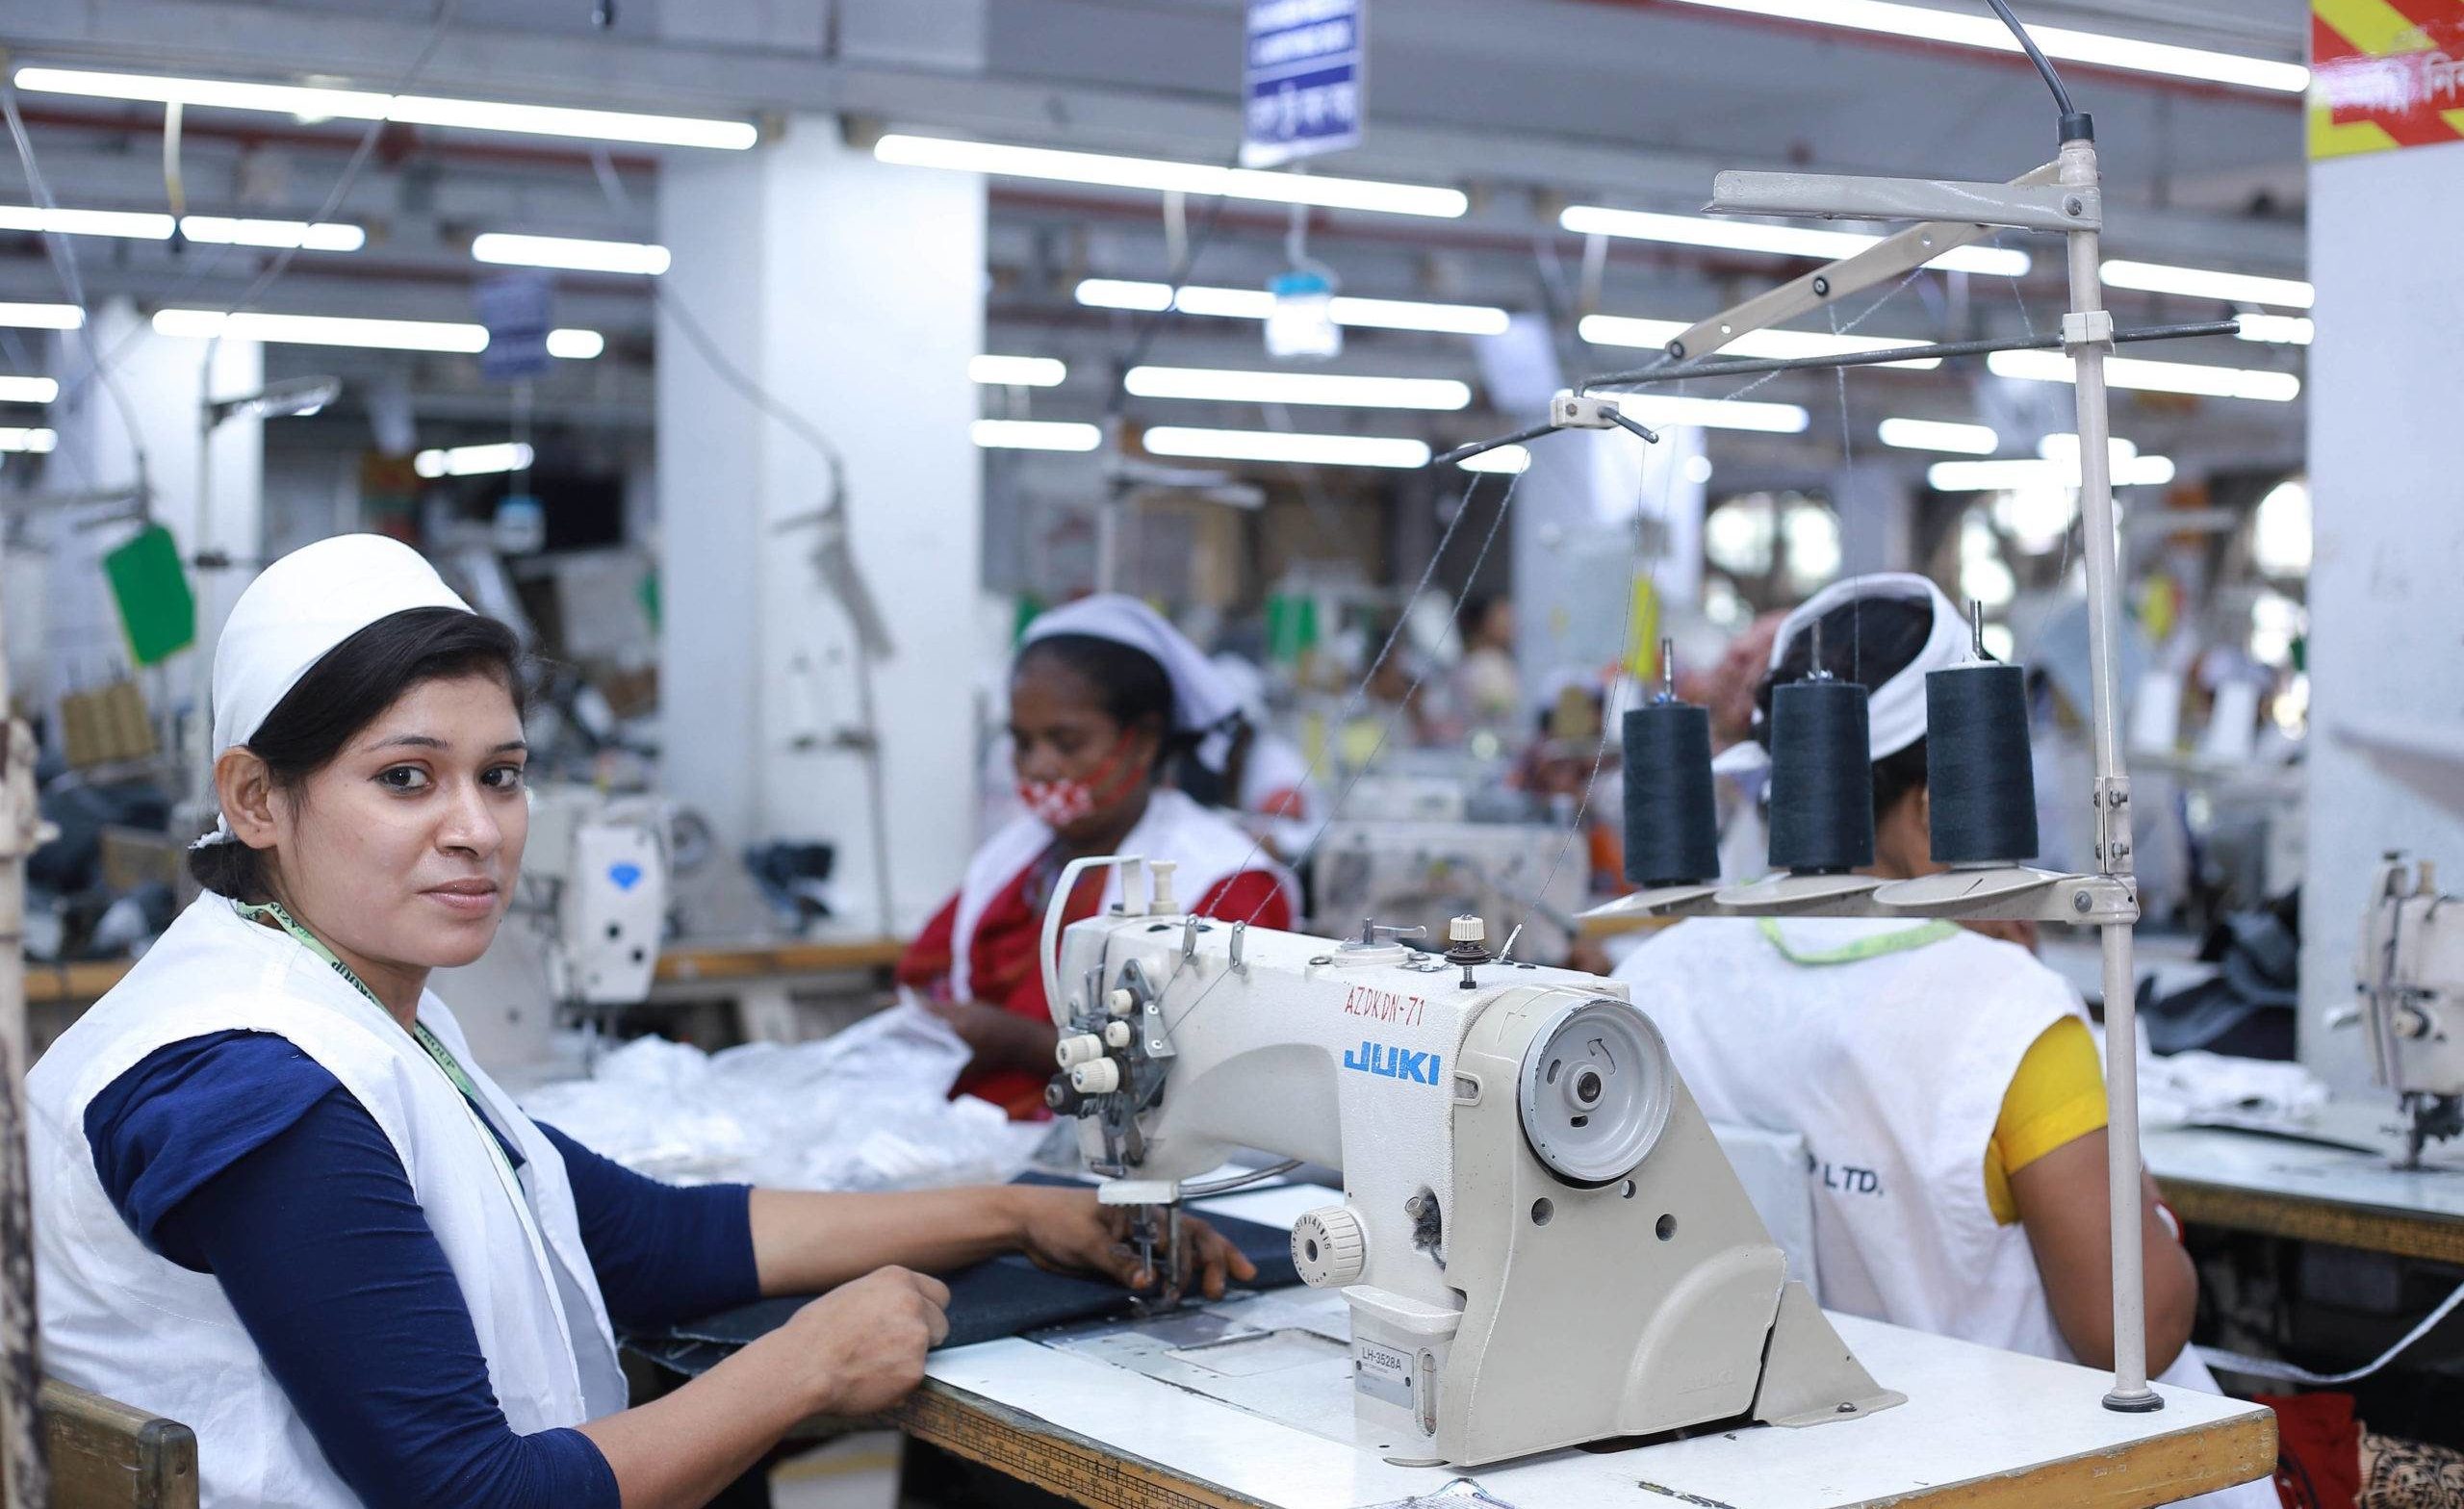 Garment production floor in Azim Group factory in Bangladesh